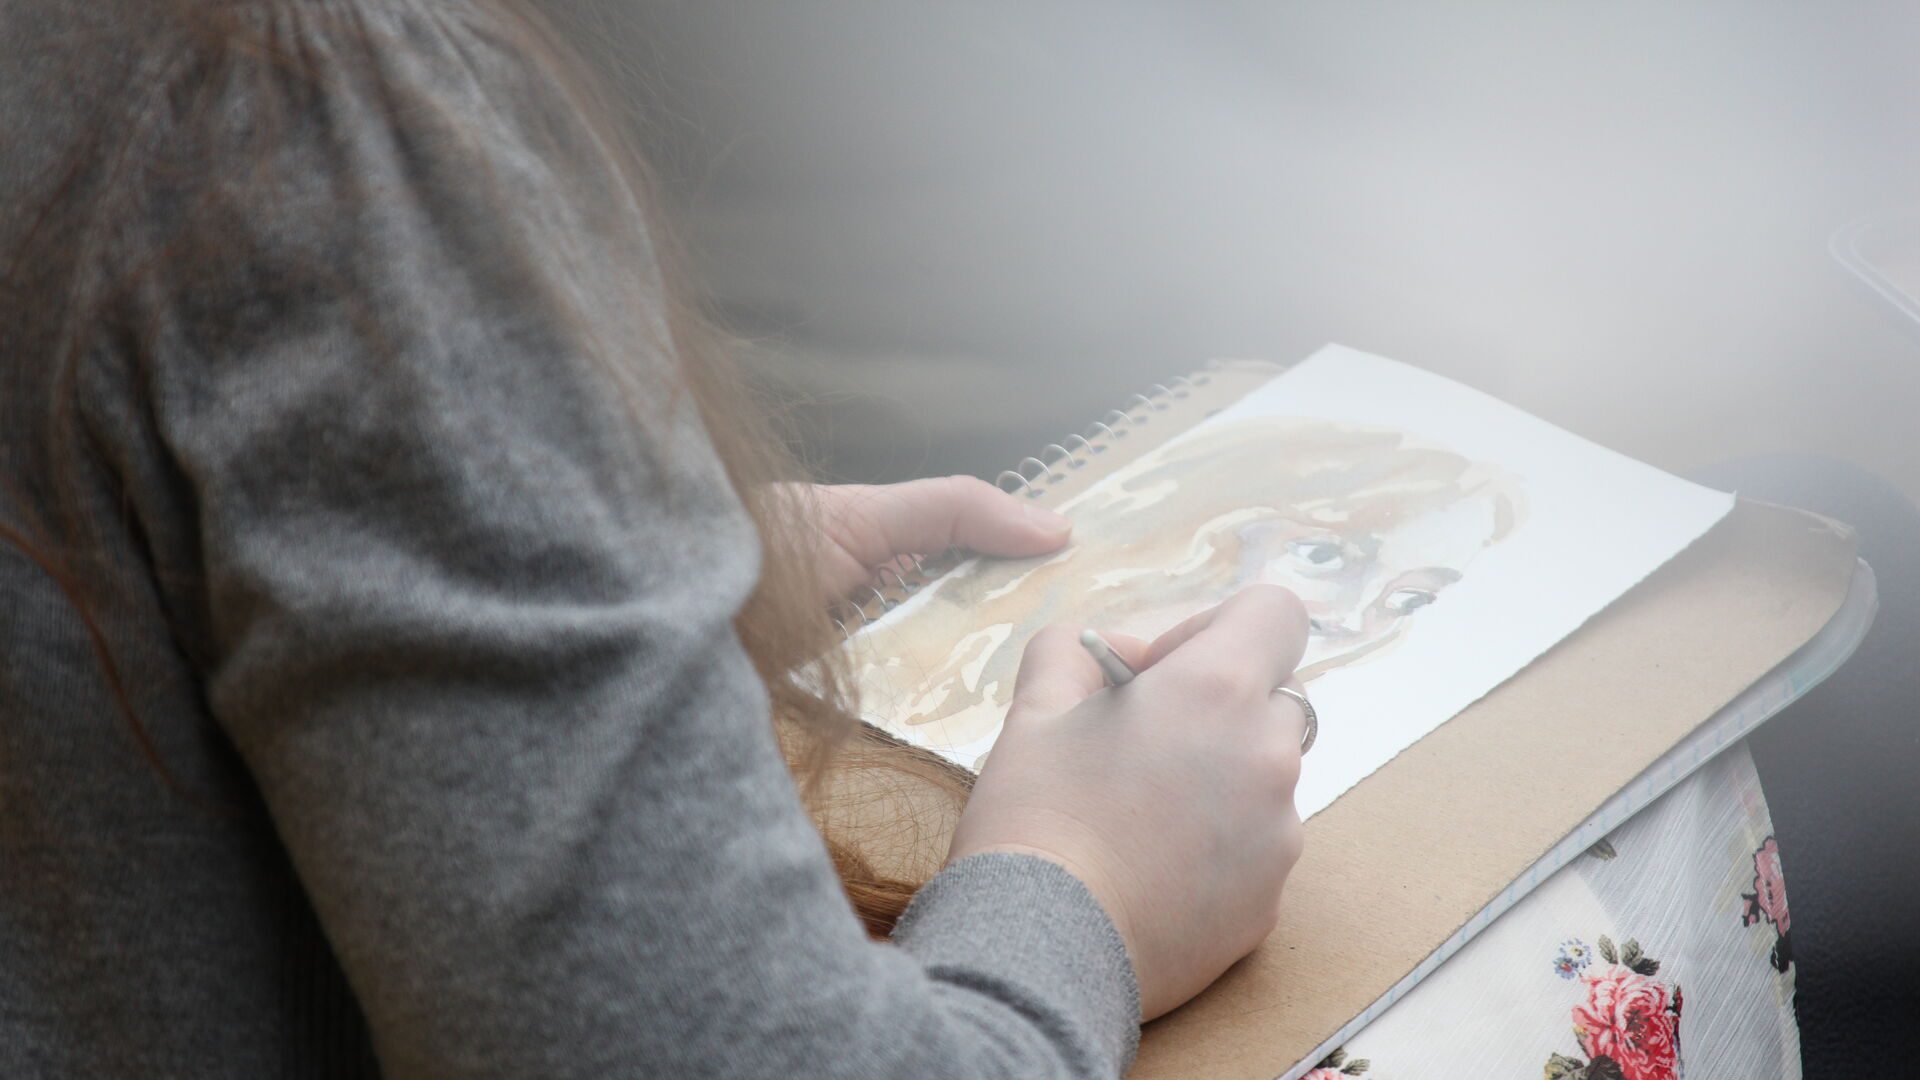 Student using watercolor paints.